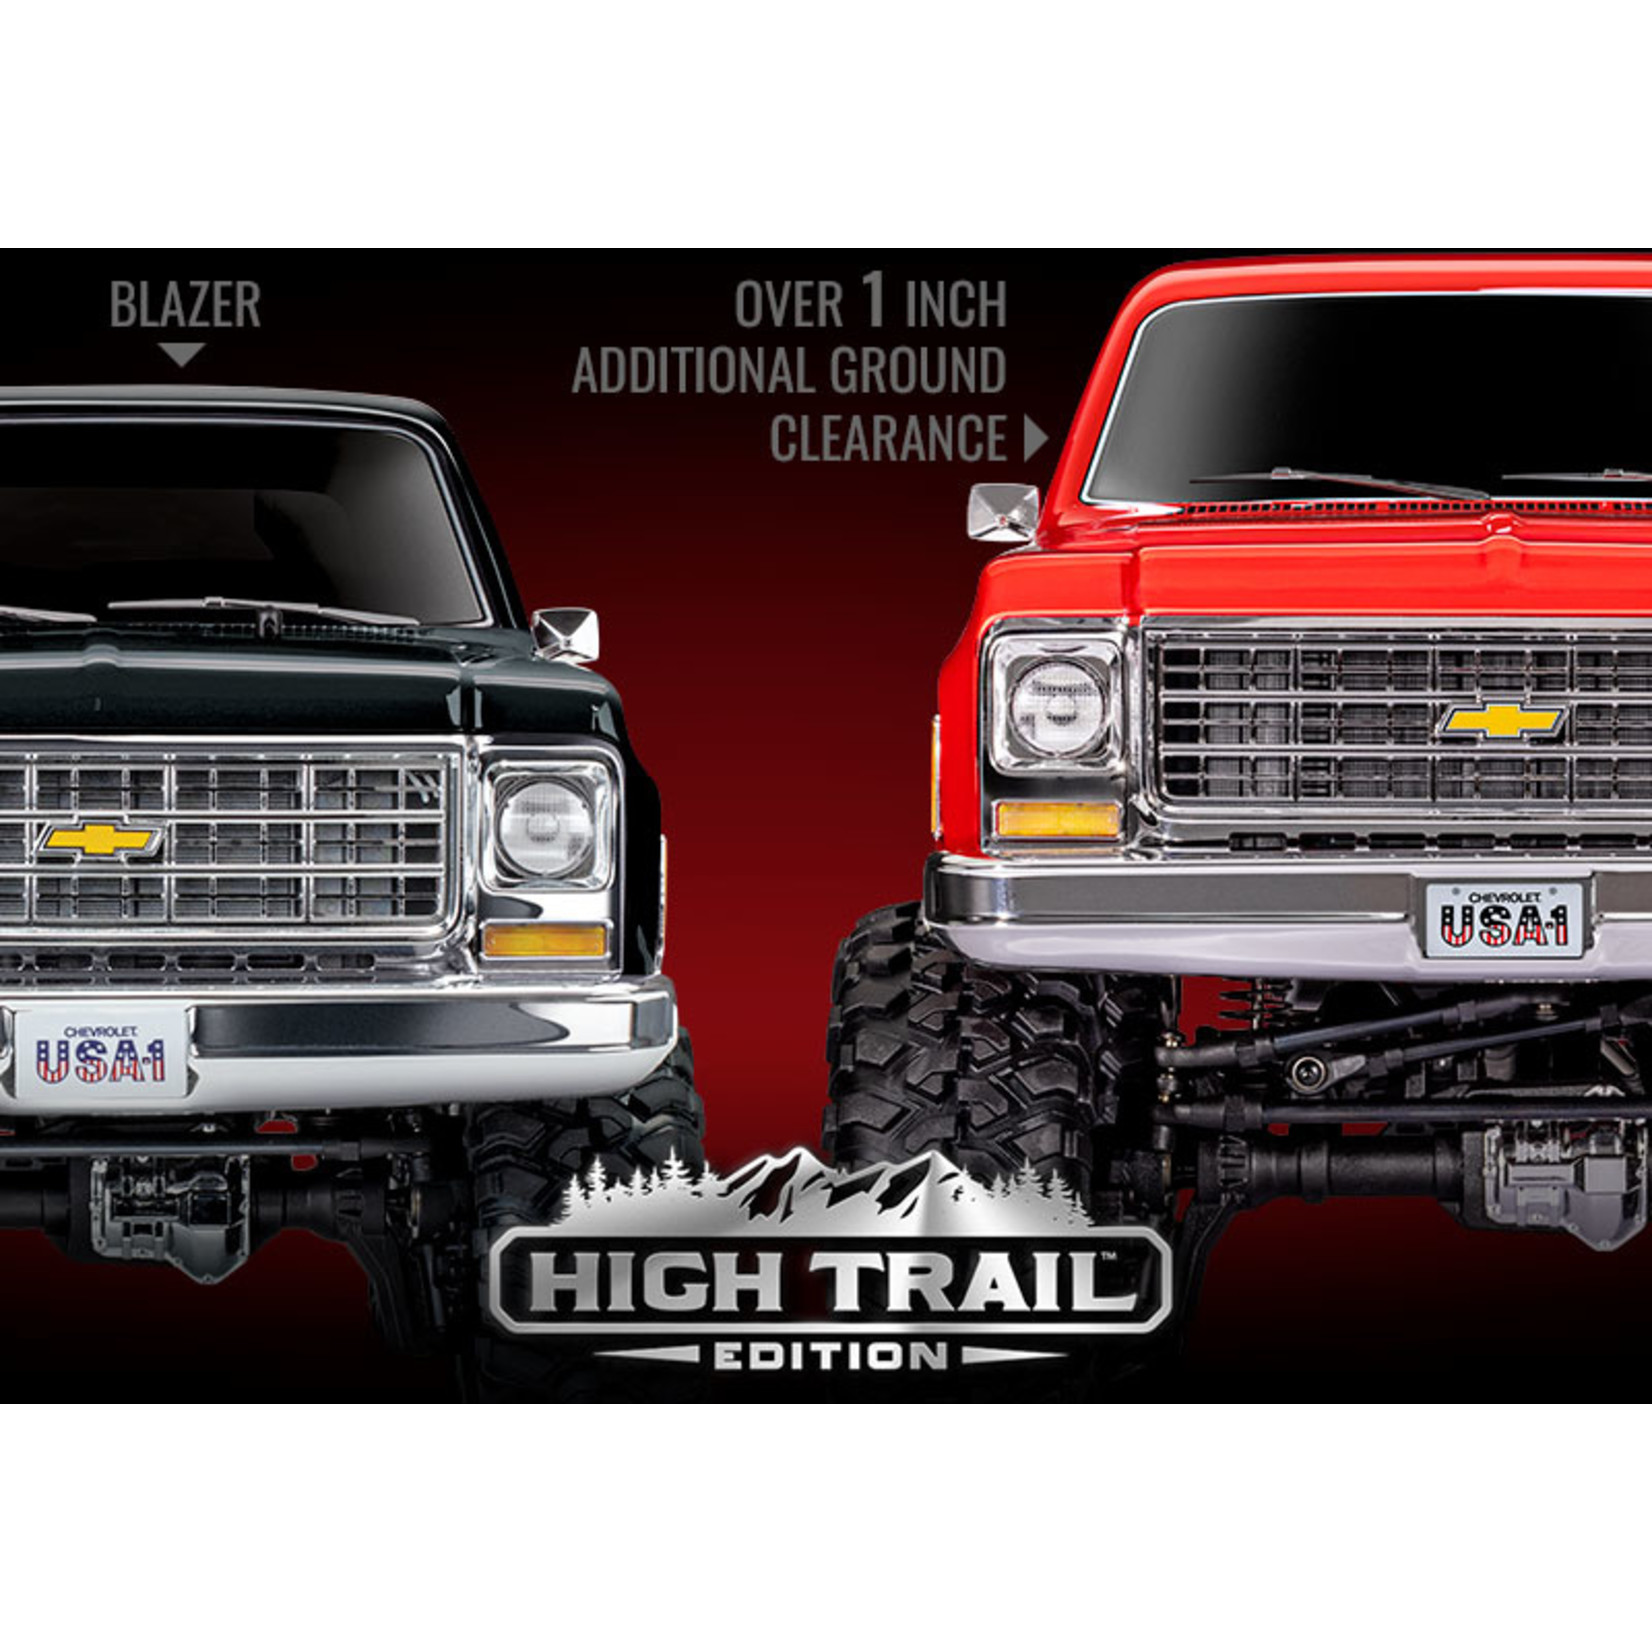 Traxxas TRX-4 Scale and Trail Crawler with 1979 Chevrolet K10 Truck Body: 1/10 Scale 4WD High Trail Edition